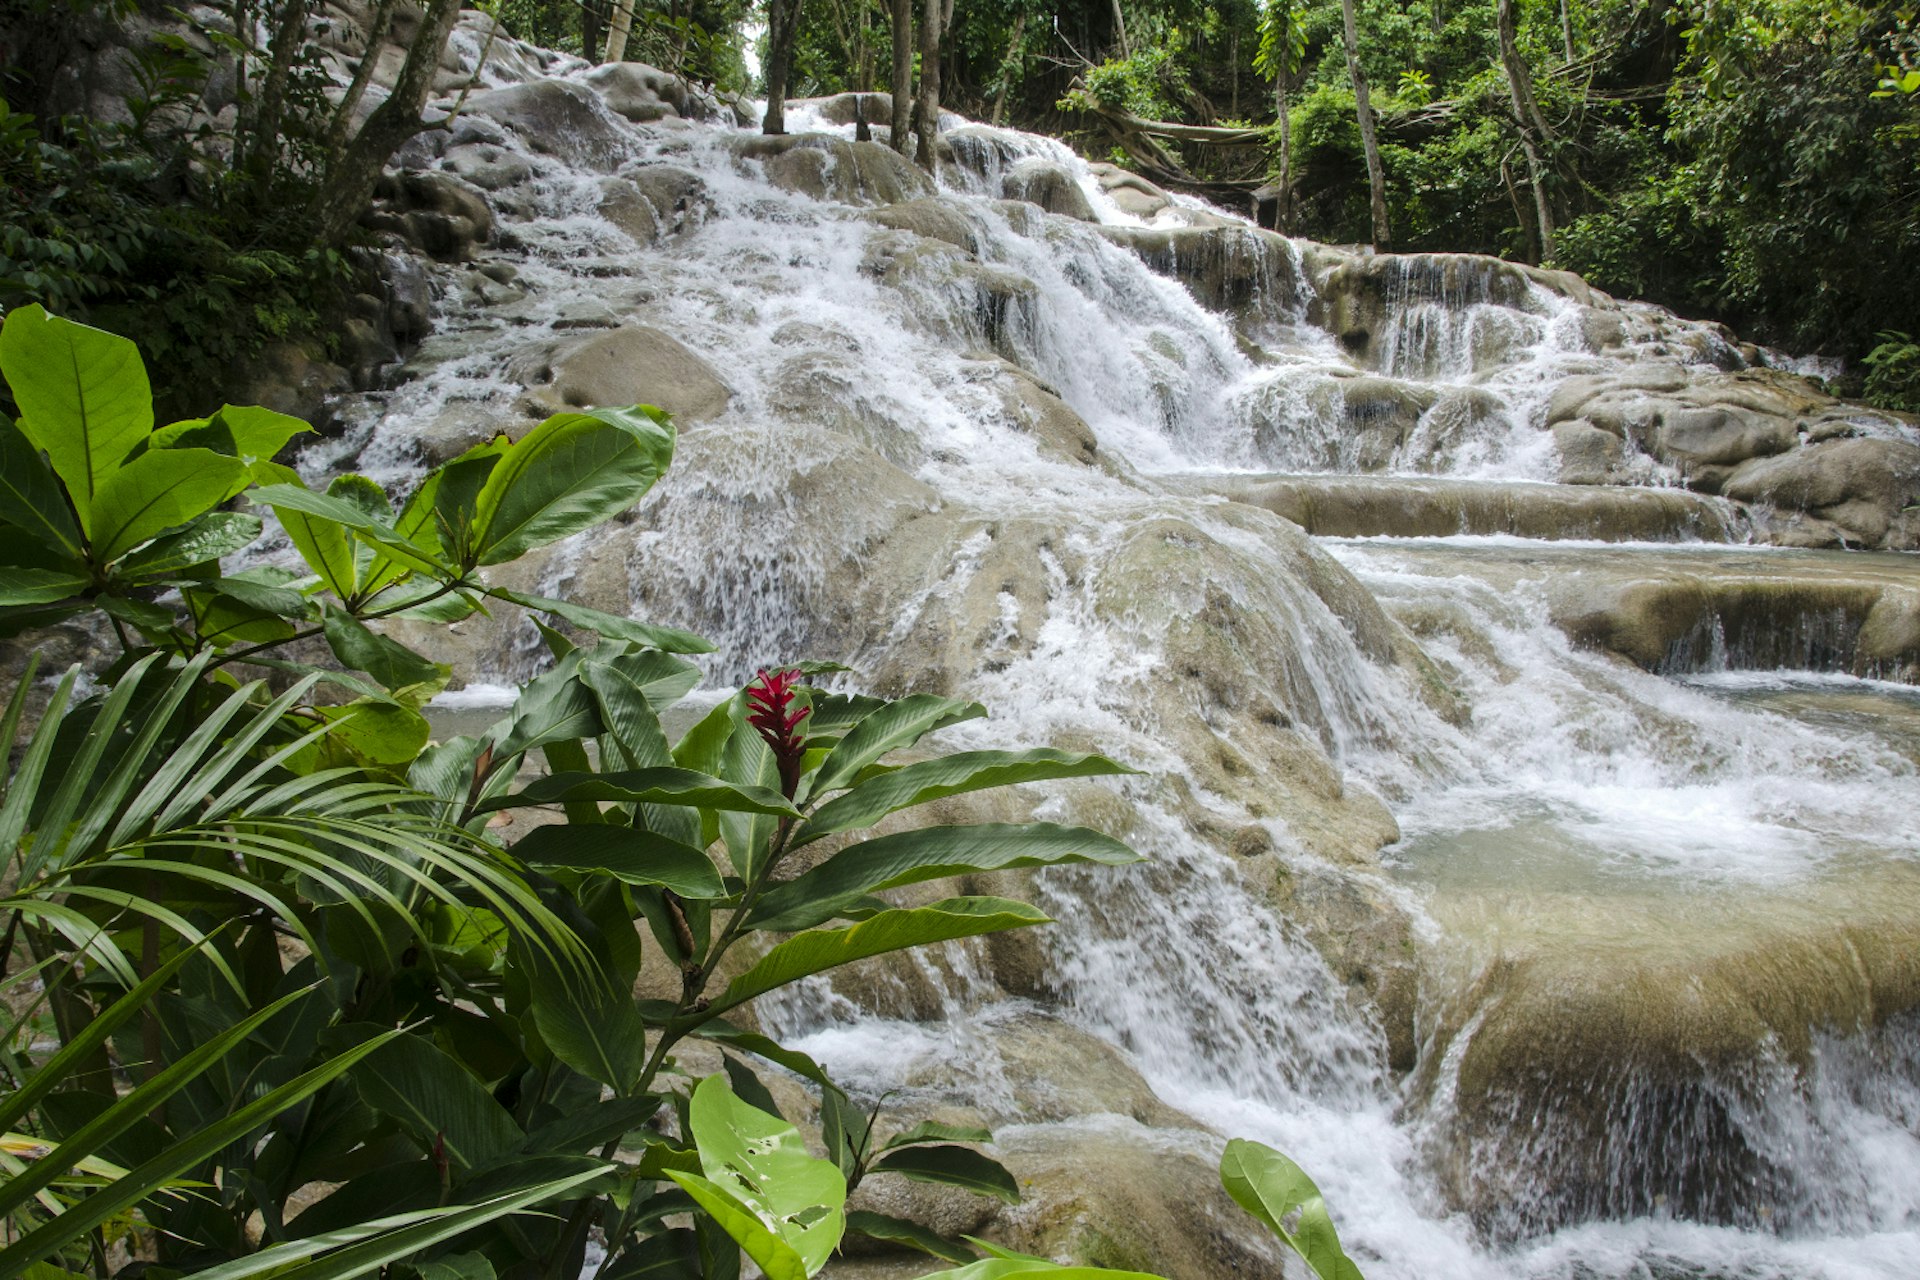 One of Alysia's first travel memories is hiking the Dunns River Falls in Jamaica © Mark Newman / Getty Images